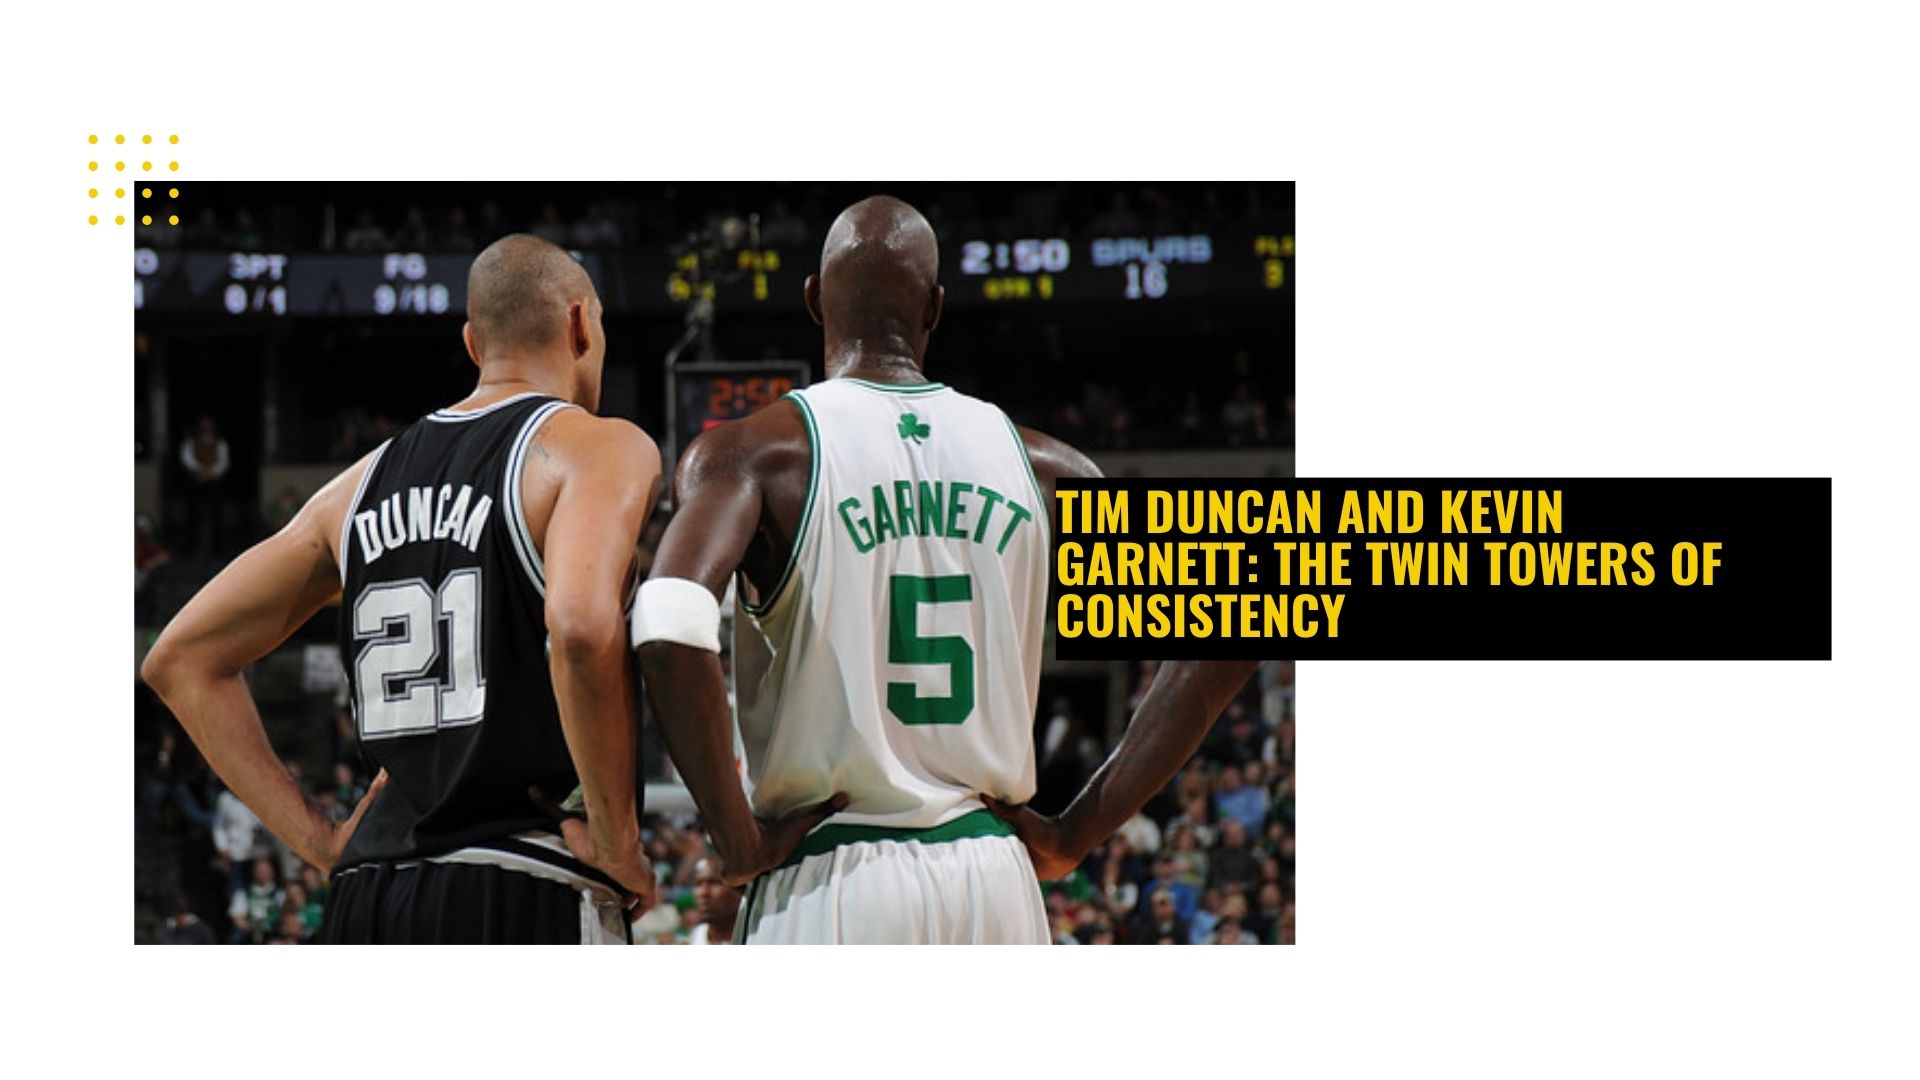 Tim Duncan and Kevin Garnett: The Twin Towers of Consistency